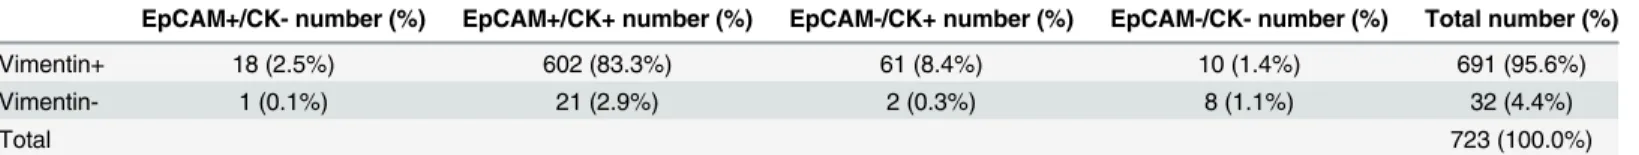 Table 5. The proportion of PC3 cells expressing epithelial and mesenchymal markers.